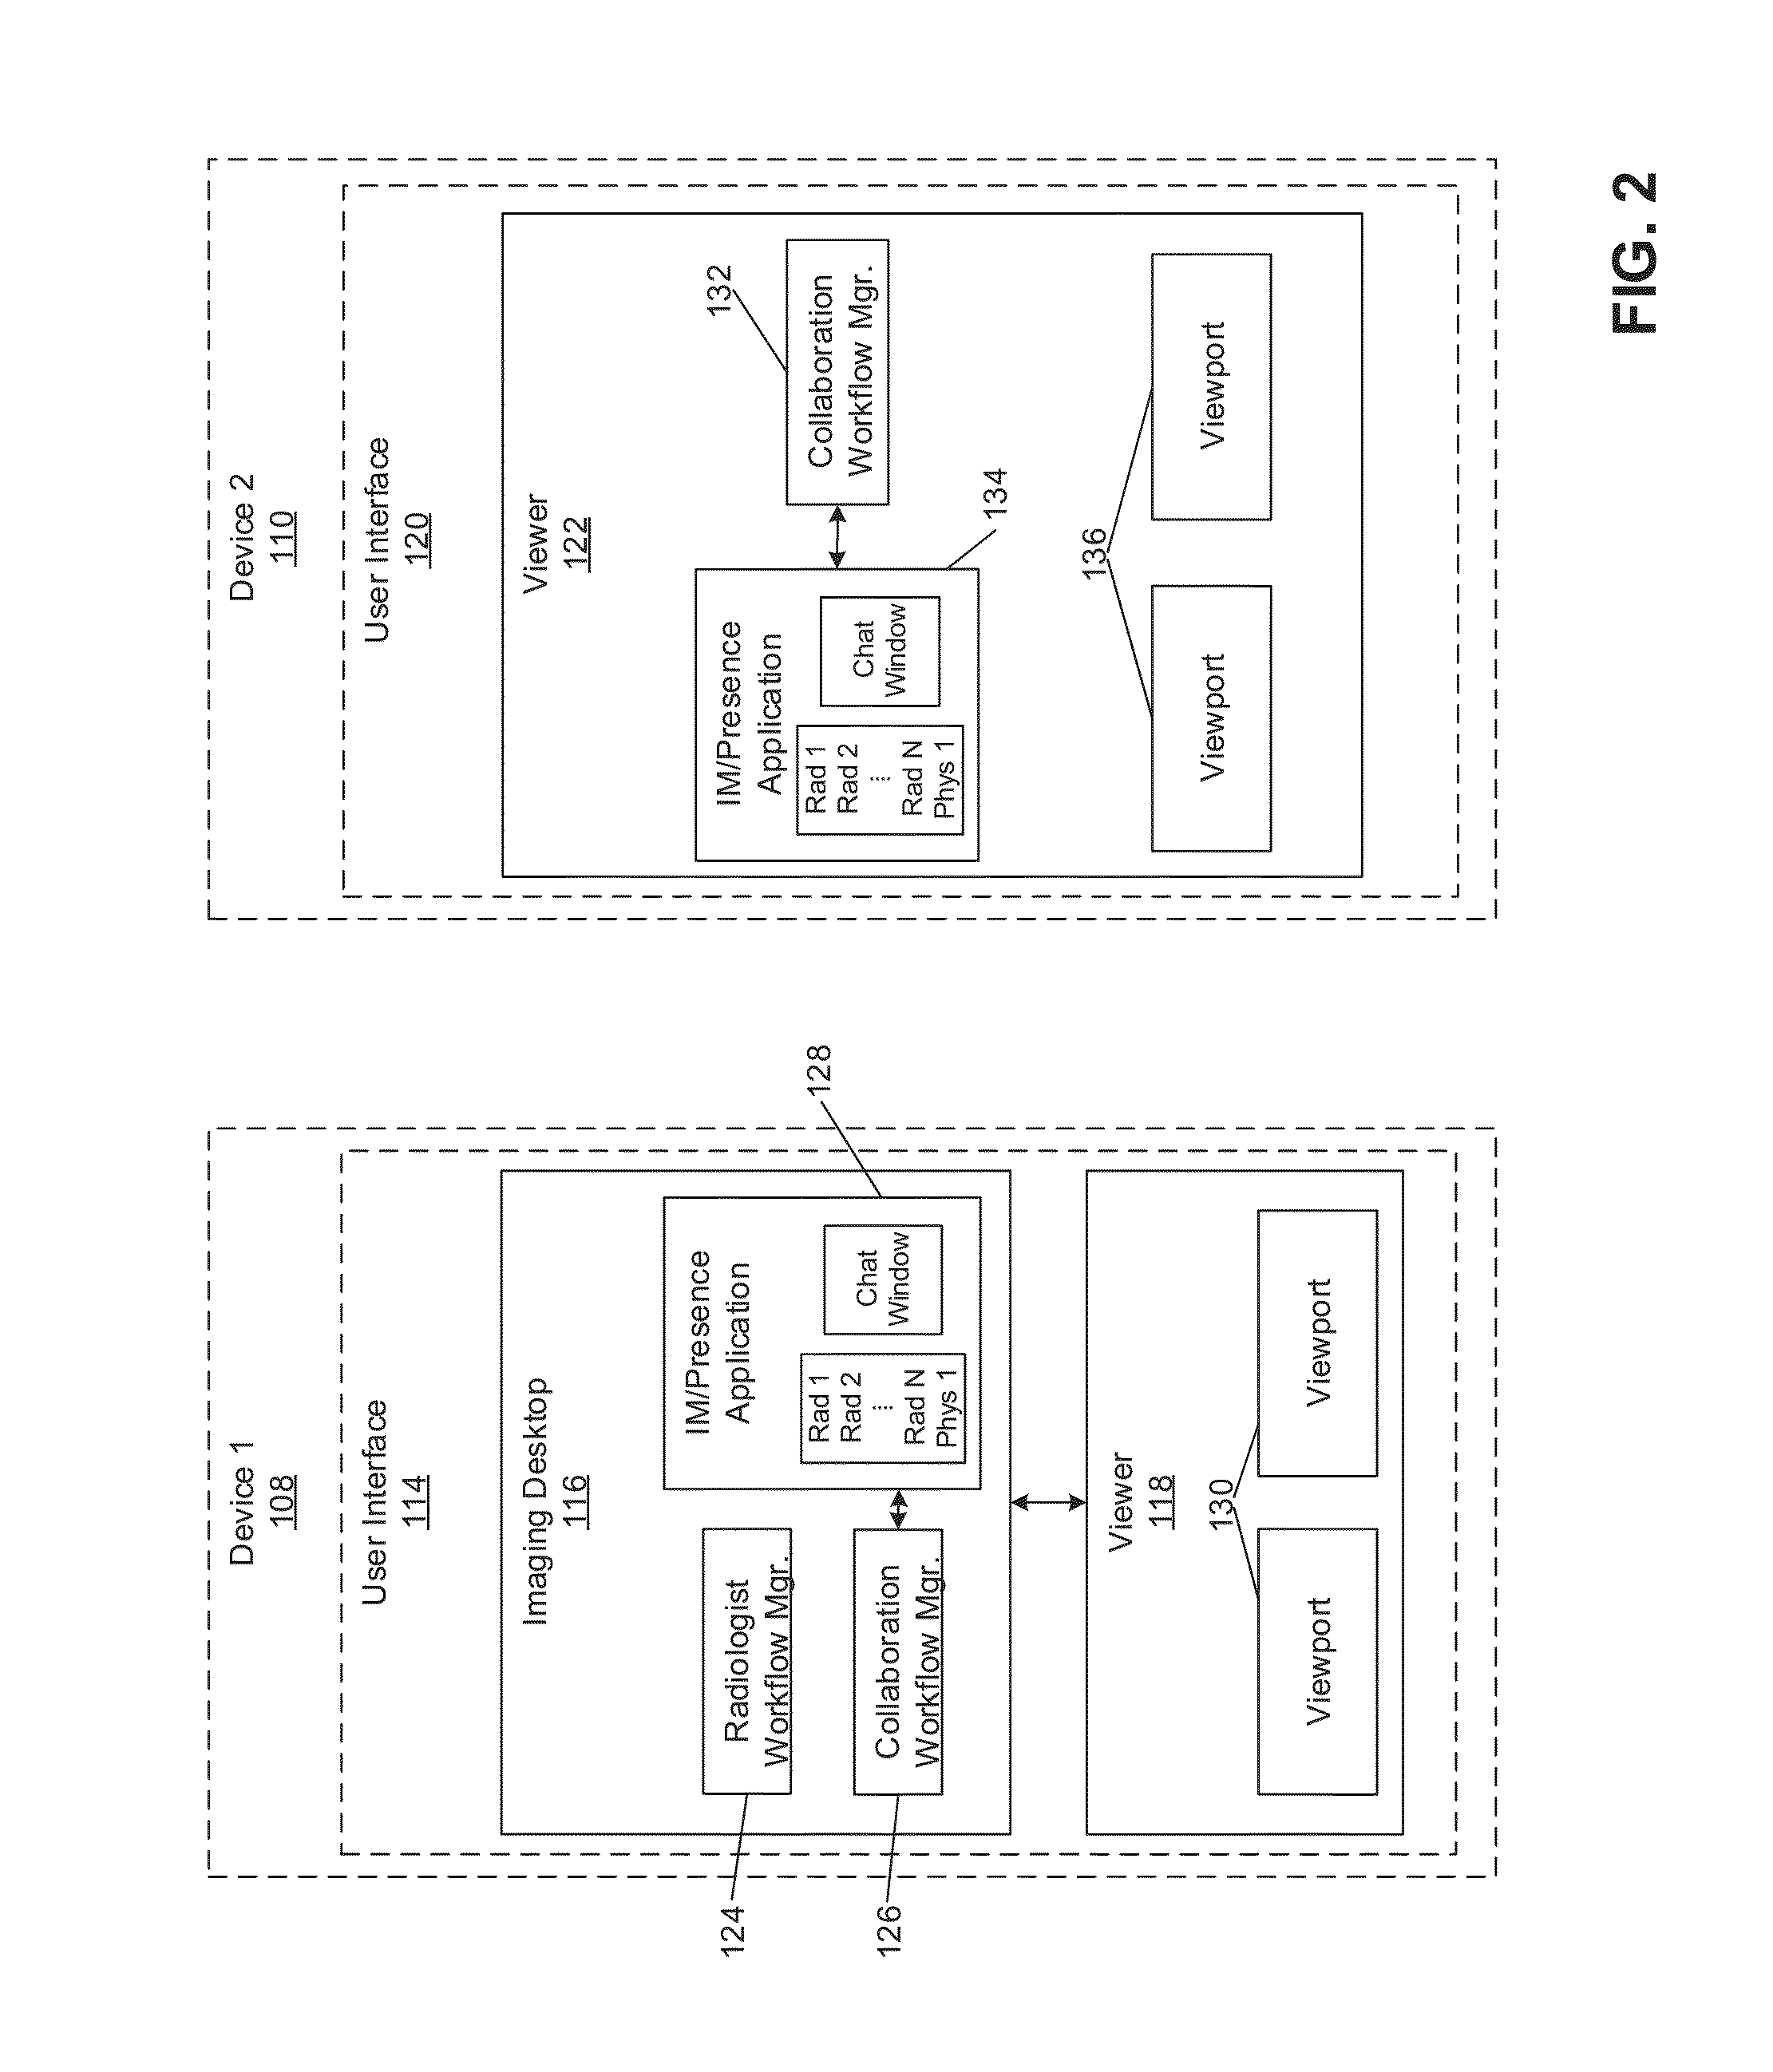 Systems and methods for medical diagnostic collaboration